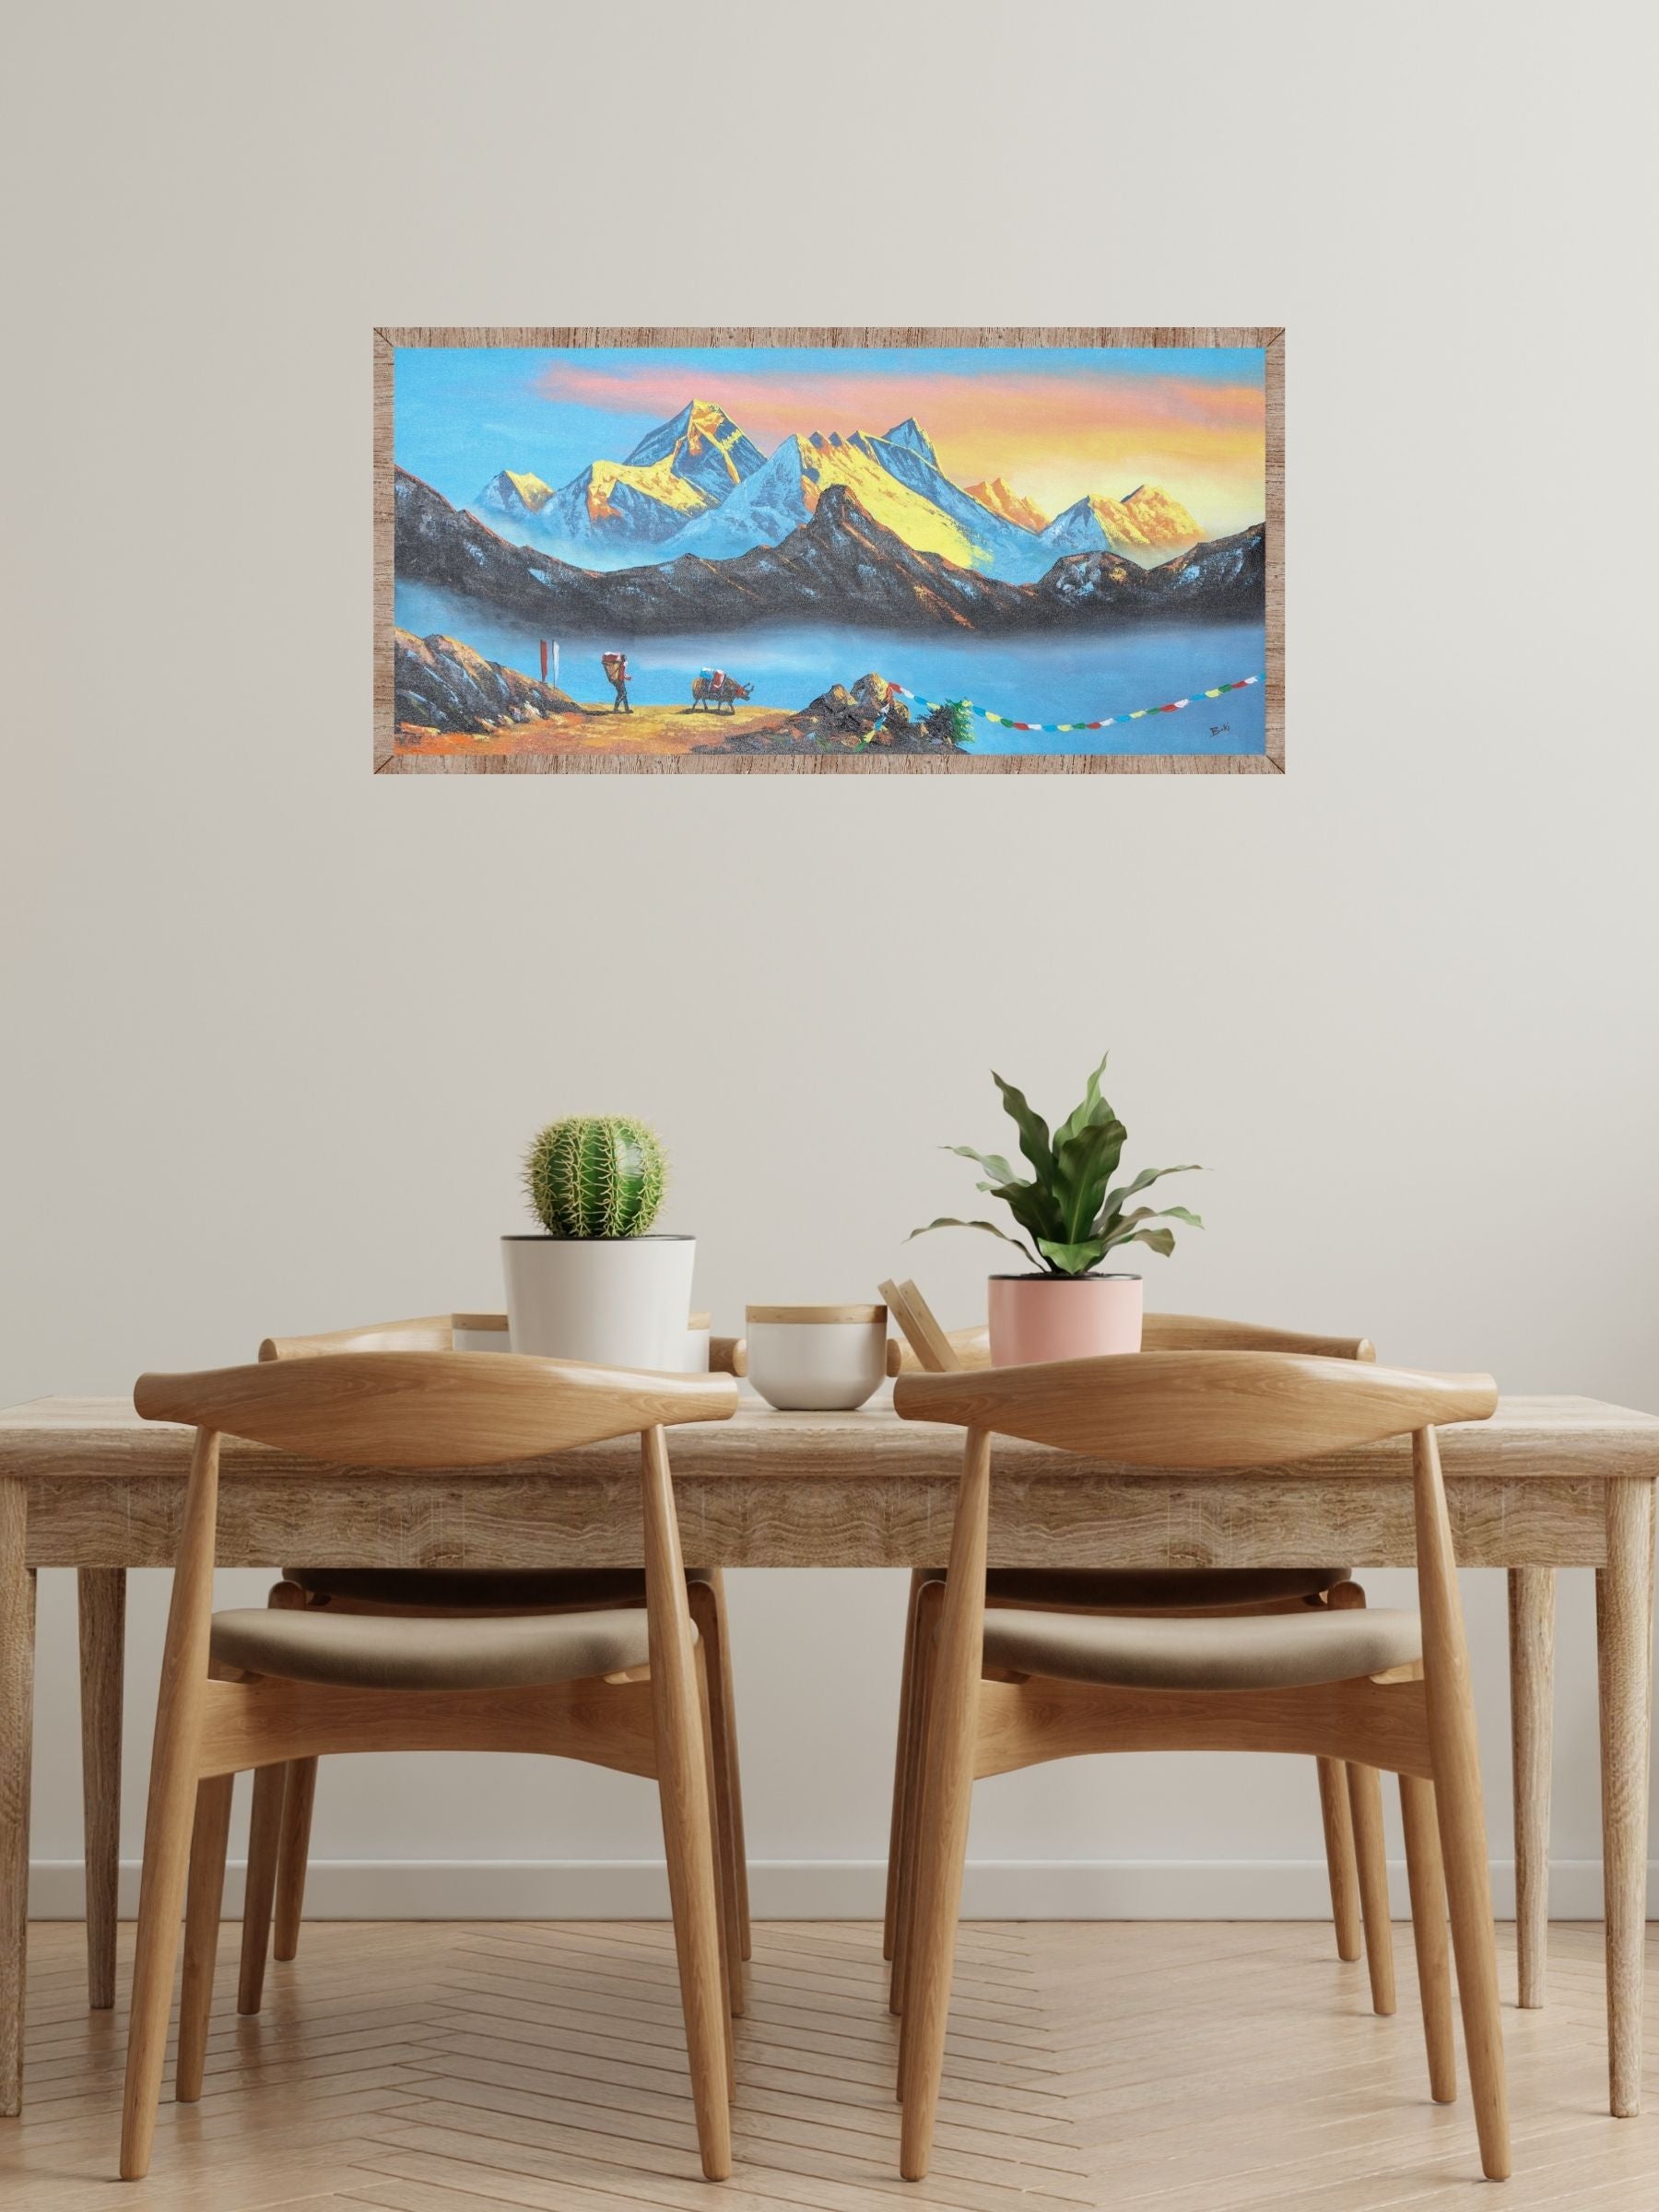 Oil Painting of Mt Everest with beautiful Natural Landscape of Sunrise.